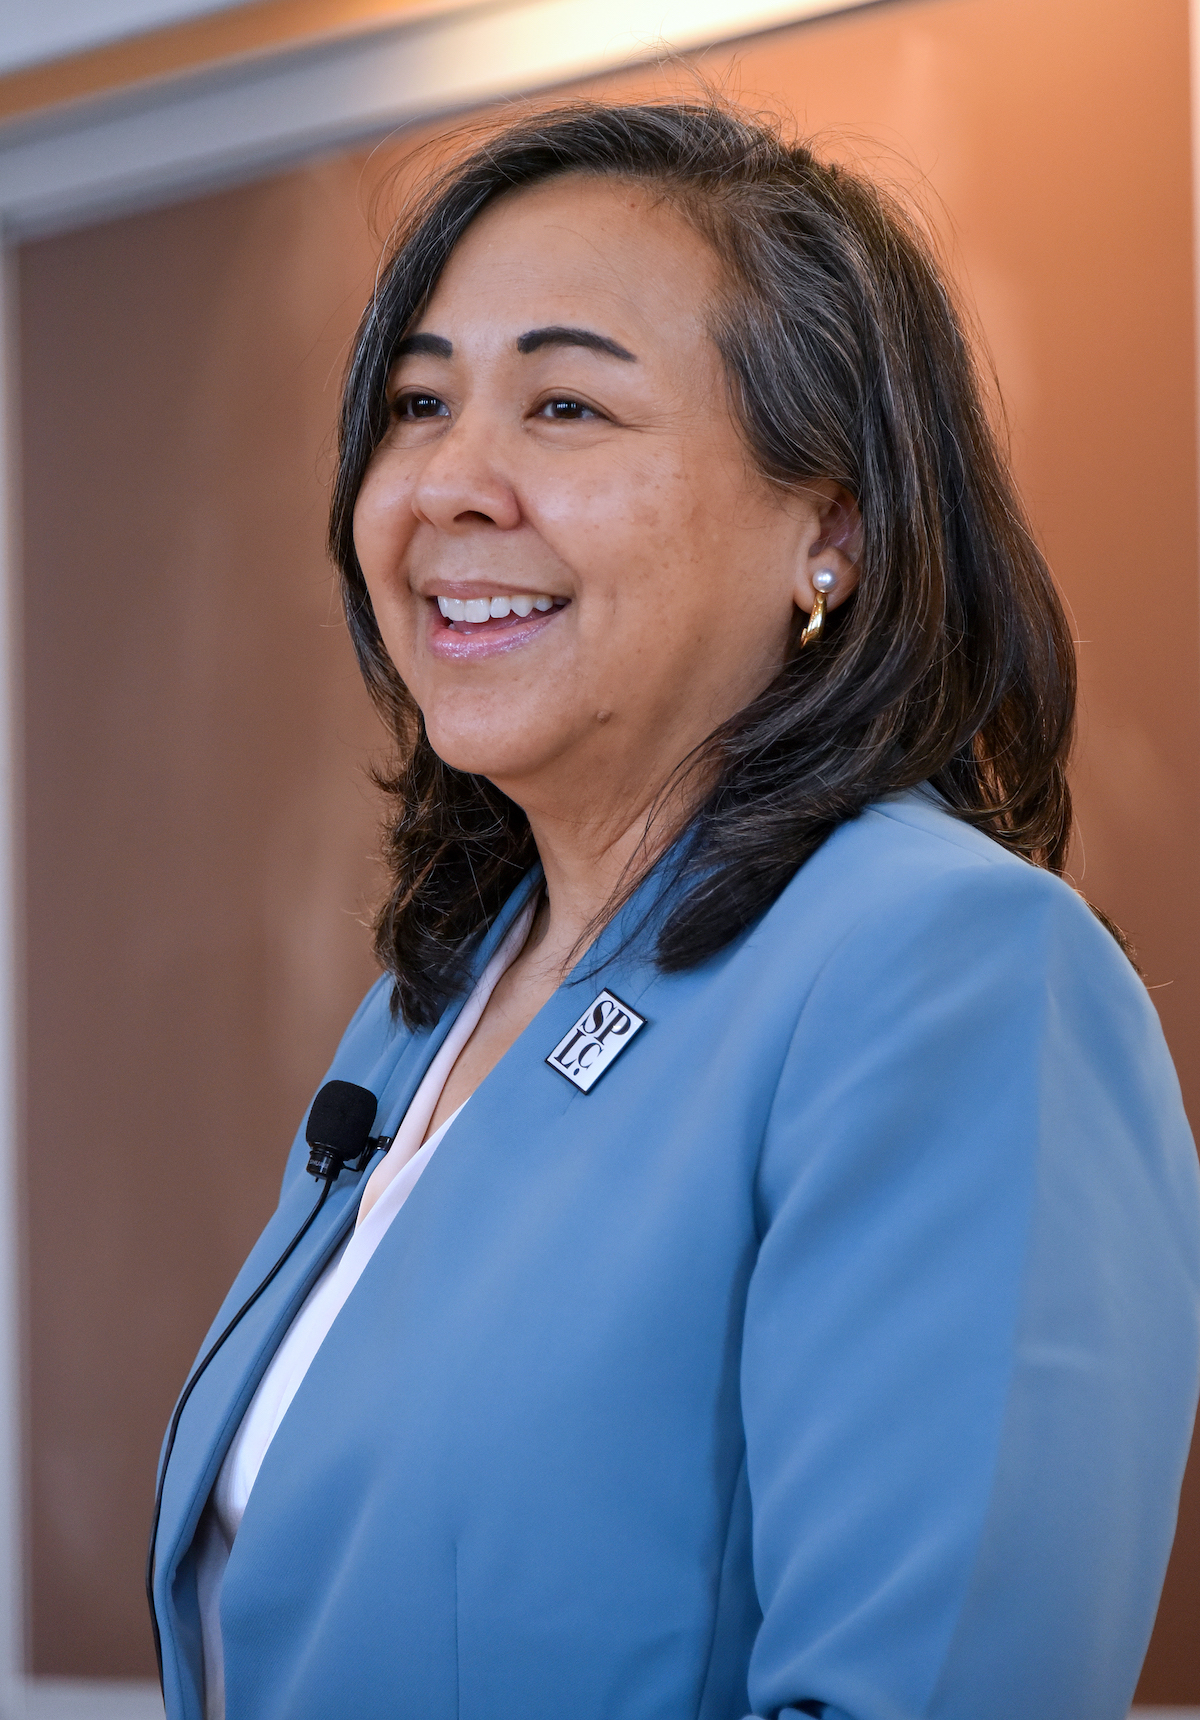 Margaret Huang, president and chief executive officer of the Southern Poverty Law Center, previously served as executive director of Amnesty International USA.